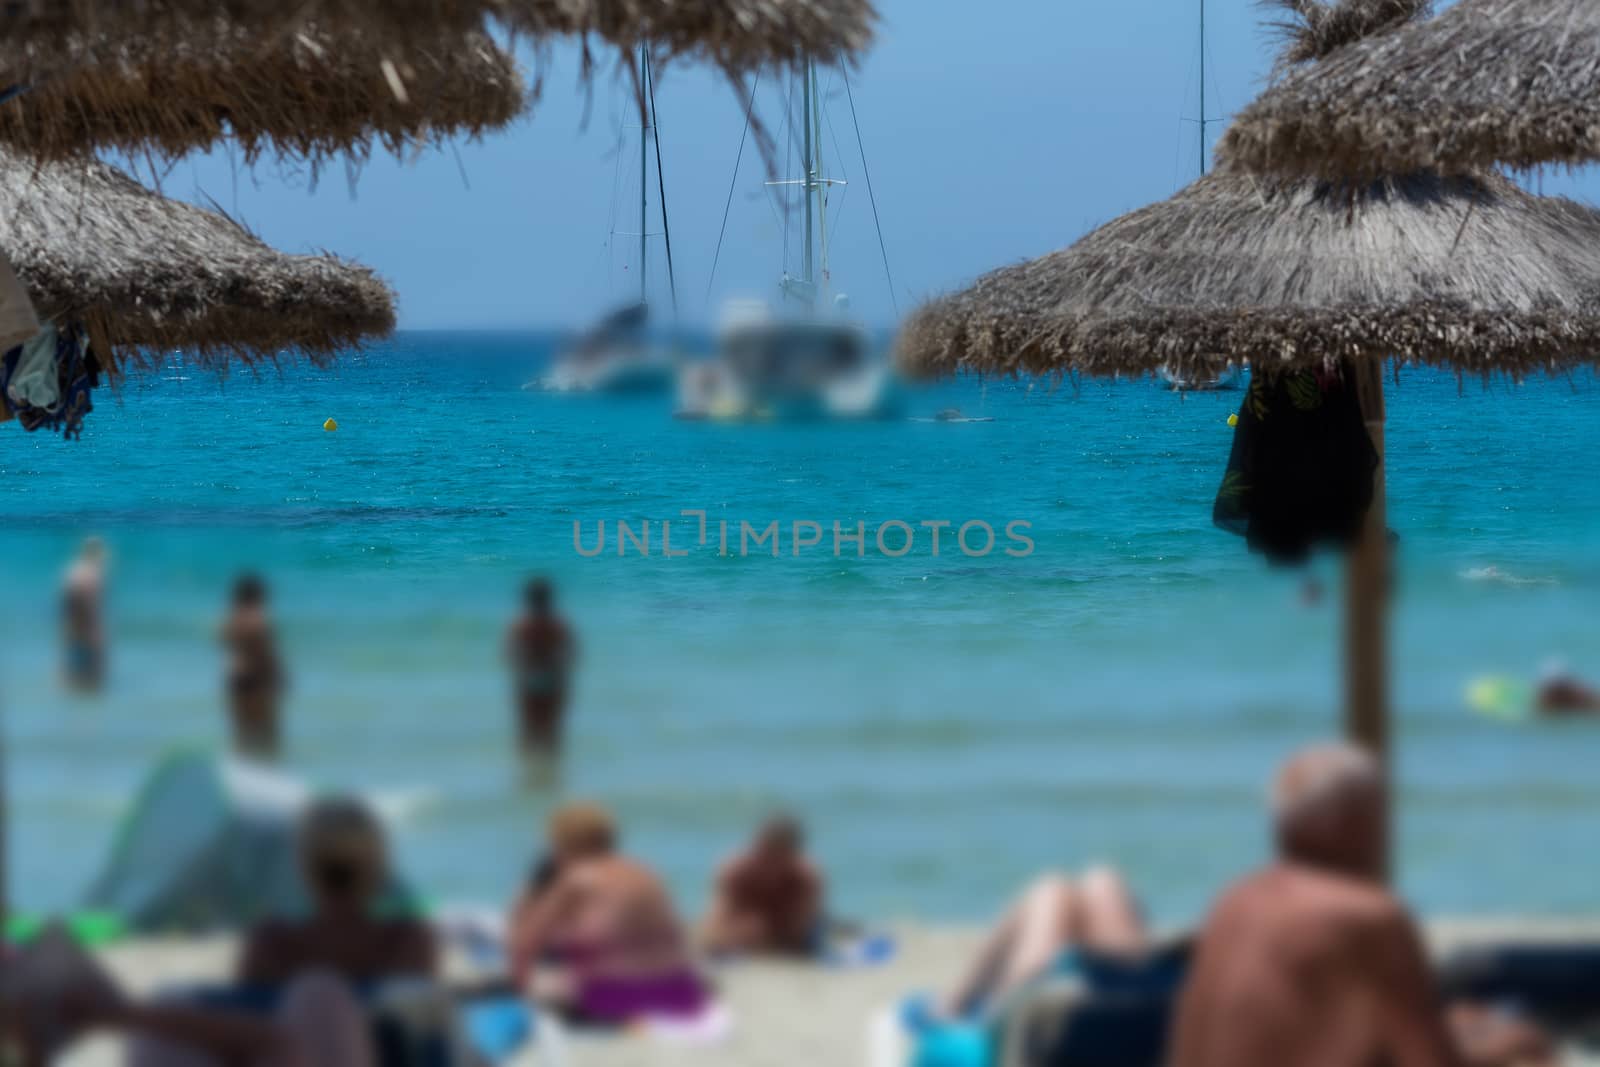 Beach life, holidaymaker at the beach bottom part of the image desired blur. Focus above composition overlooking the sea.